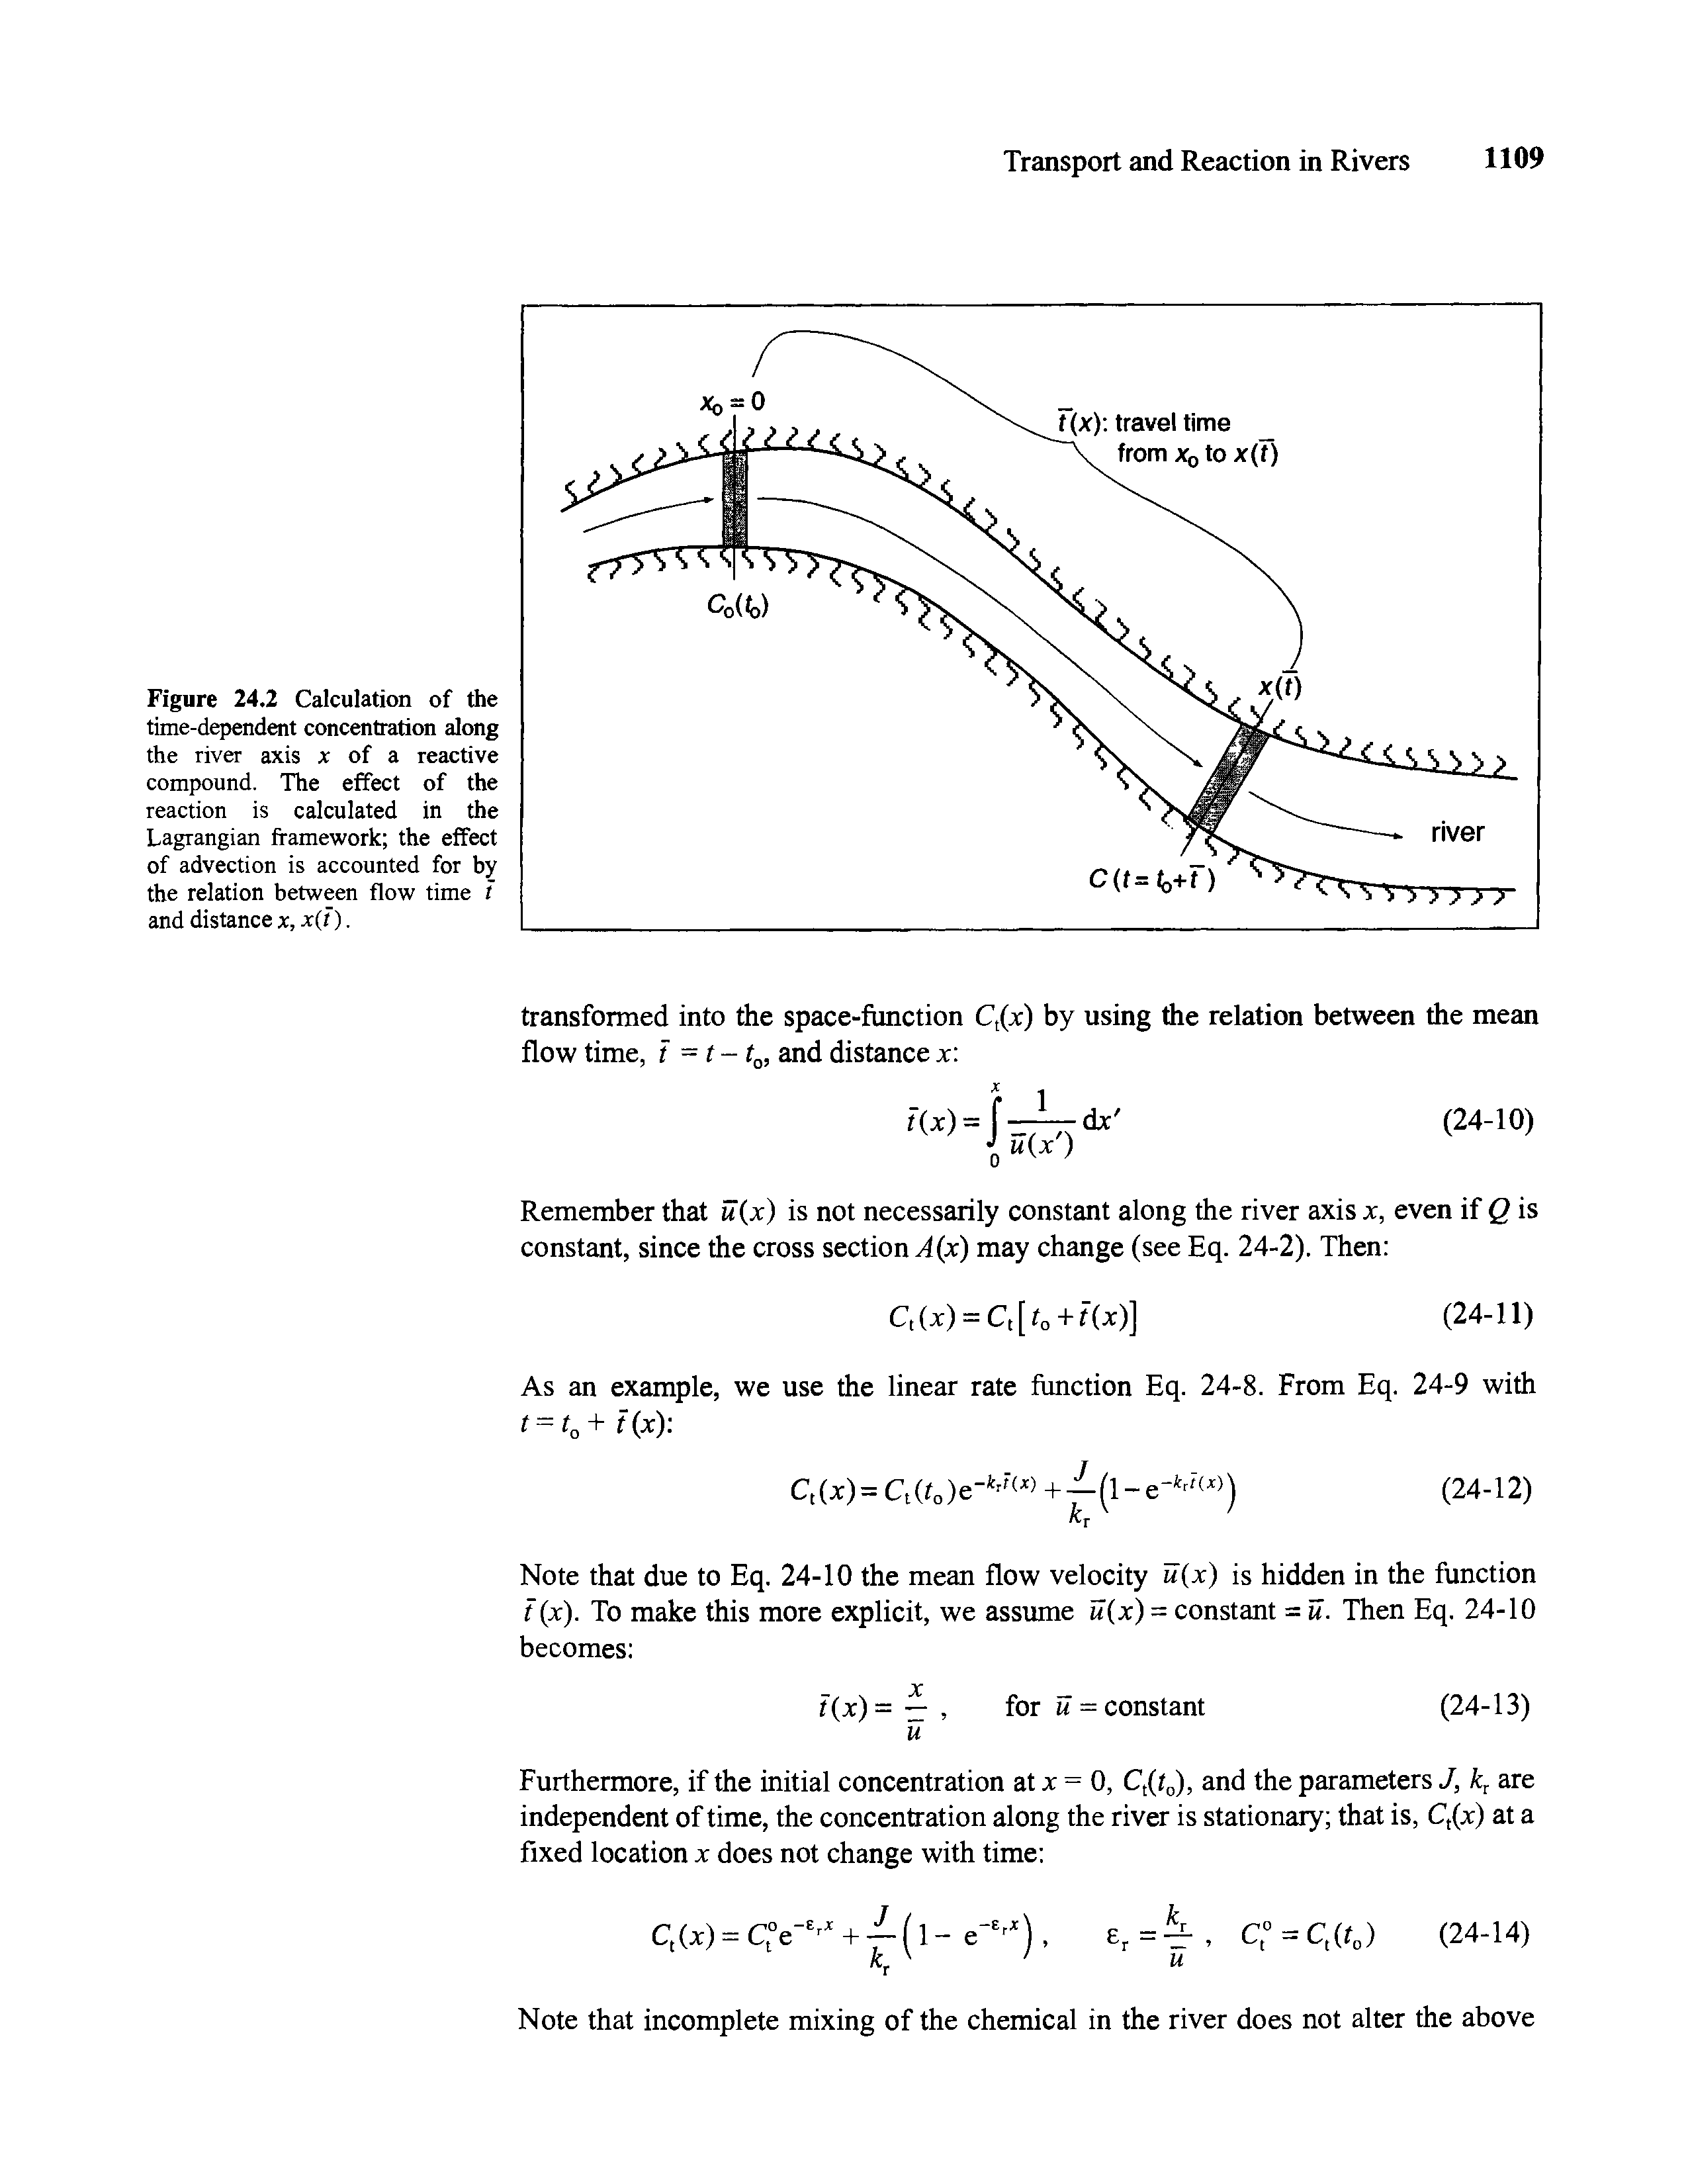 Figure 24.2 Calculation of the time-dependent concentration along the river axis x of a reactive compound. The effect of the reaction is calculated in the Lagrangian framework the effect of advection is accounted for by the relation between flow time t and distance x, x(t).